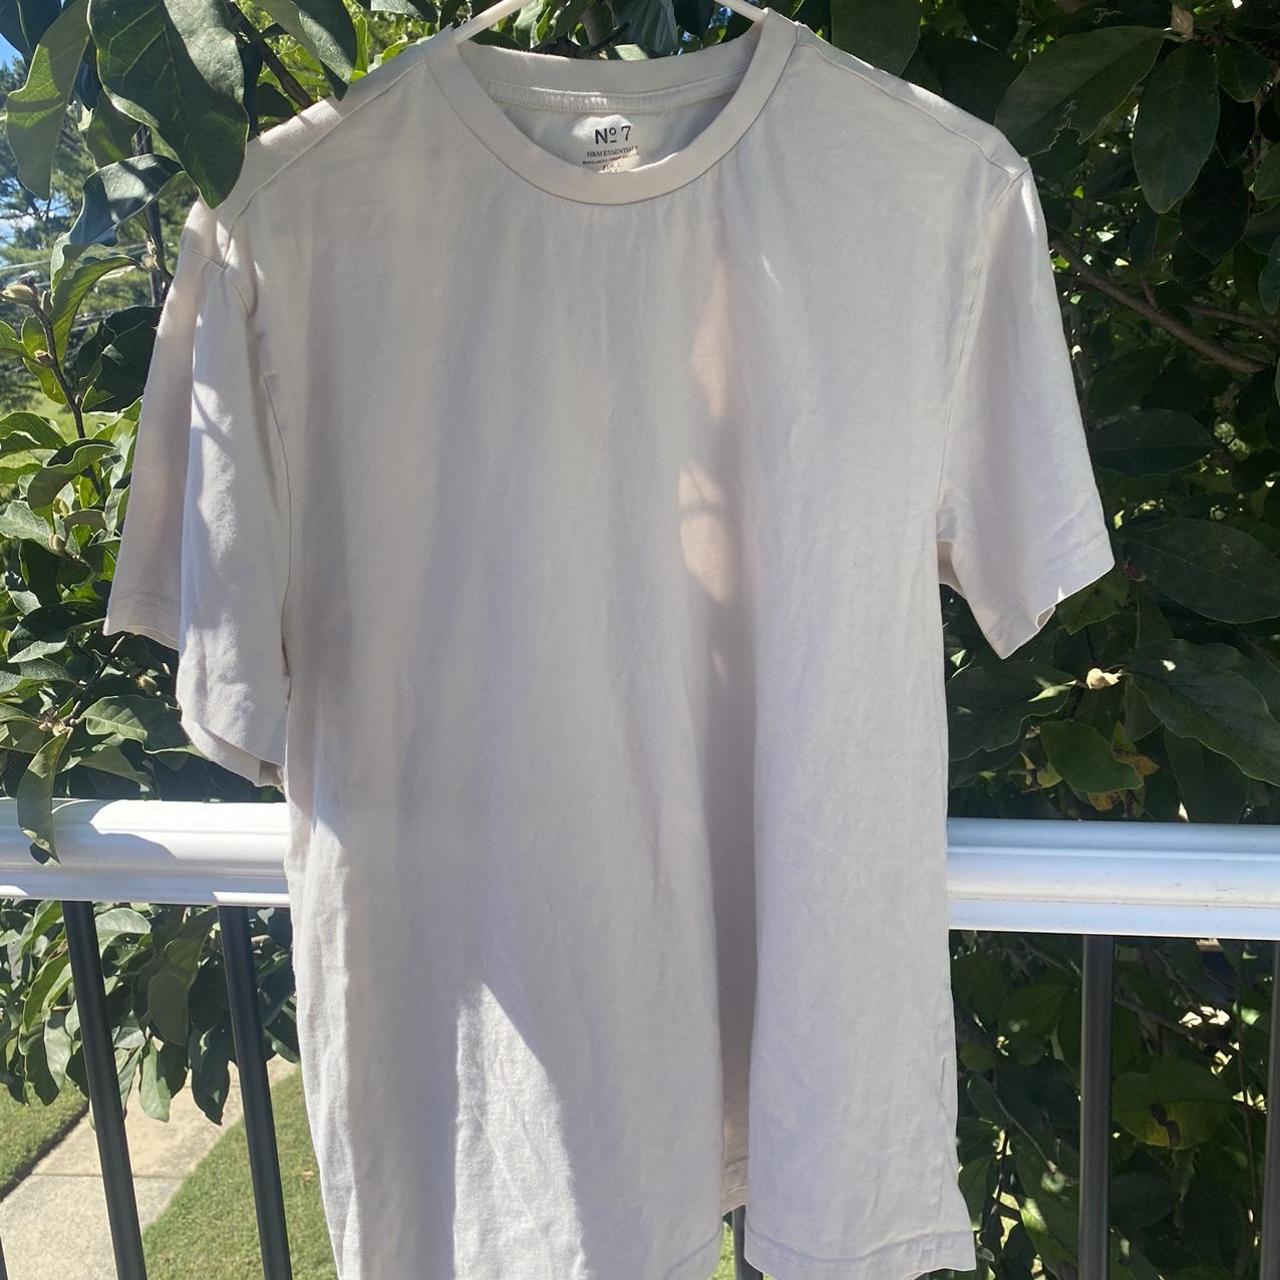 Product Image 1 - Mens off white HM shirt